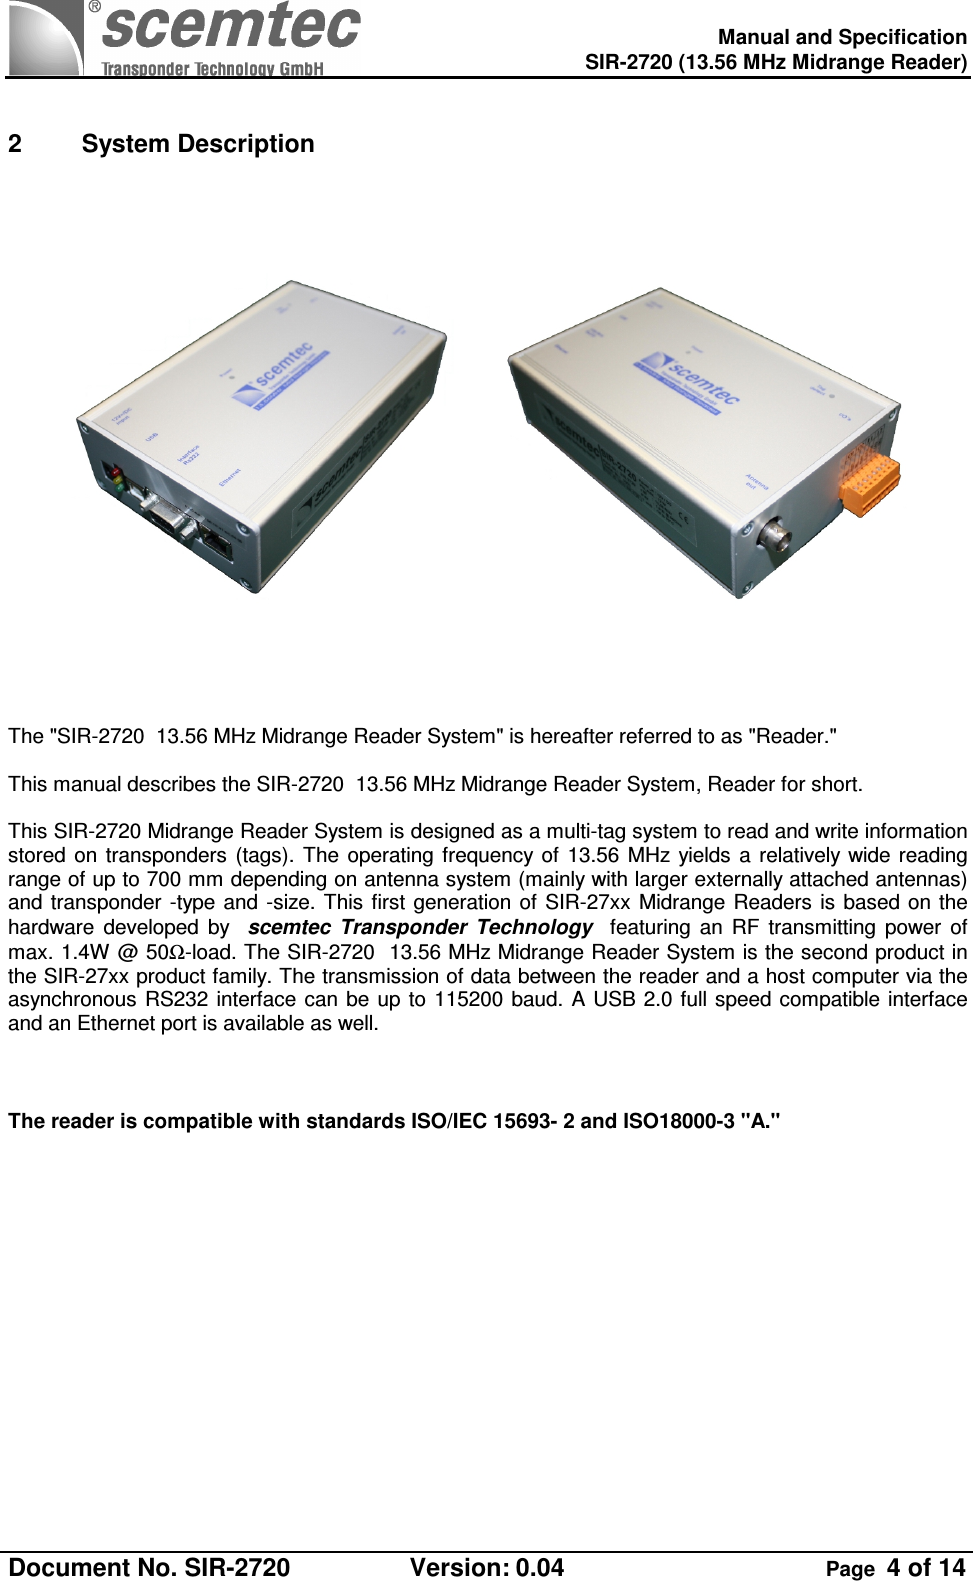    Manual and Specification  SIR-2720 (13.56 MHz Midrange Reader)  Document No. SIR-2720  Version: 0.04  Page  4 of 14   2  System Description                 The &quot;SIR-2720  13.56 MHz Midrange Reader System&quot; is hereafter referred to as &quot;Reader.&quot;  This manual describes the SIR-2720  13.56 MHz Midrange Reader System, Reader for short.  This SIR-2720 Midrange Reader System is designed as a multi-tag system to read and write information stored  on  transponders  (tags).  The  operating  frequency of  13.56  MHz  yields  a relatively wide  reading range of up to 700 mm depending on antenna system (mainly with larger externally attached antennas) and transponder -type  and -size. This first  generation of  SIR-27xx  Midrange Readers is  based on the hardware  developed  by    scemtec  Transponder  Technology    featuring  an  RF  transmitting  power  of max. 1.4W @ 50Ω-load. The SIR-2720  13.56 MHz Midrange Reader System is the second product in the SIR-27xx product family. The transmission of data between the reader and a host computer via the asynchronous  RS232  interface  can  be  up  to  115200 baud. A USB 2.0 full speed compatible interface and an Ethernet port is available as well.    The reader is compatible with standards ISO/IEC 15693- 2 and ISO18000-3 &quot;A.&quot;  